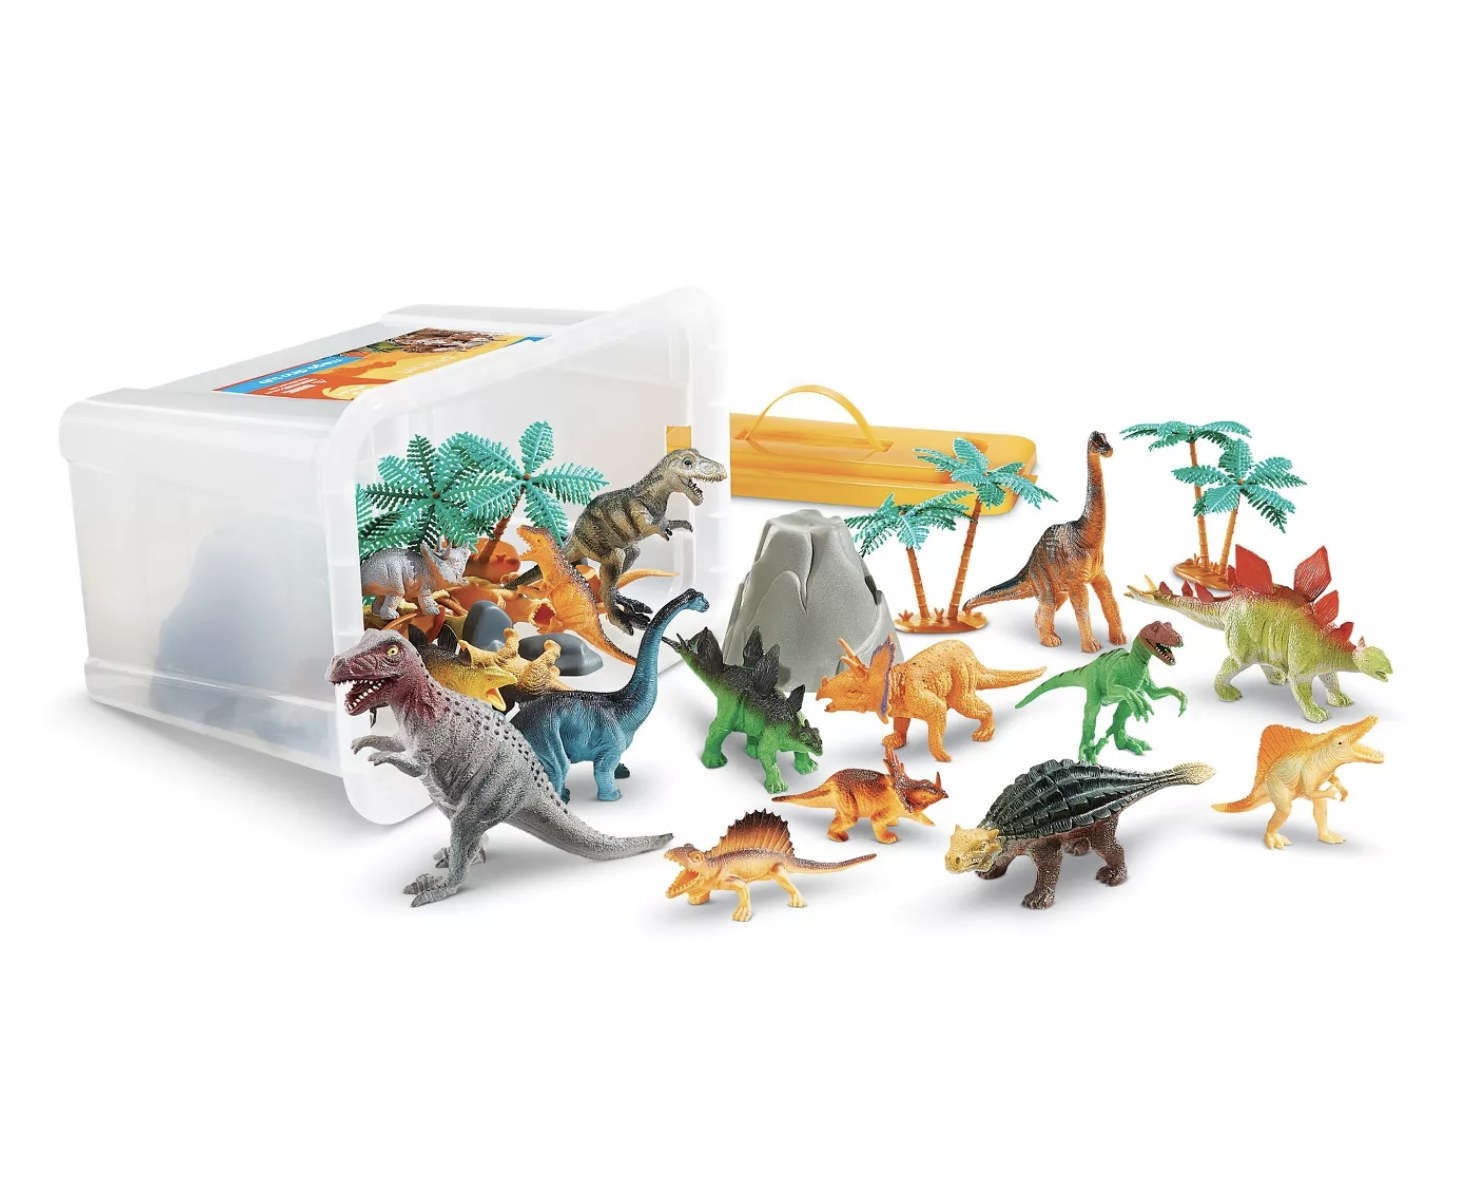 A container full of various toy dinosaurs